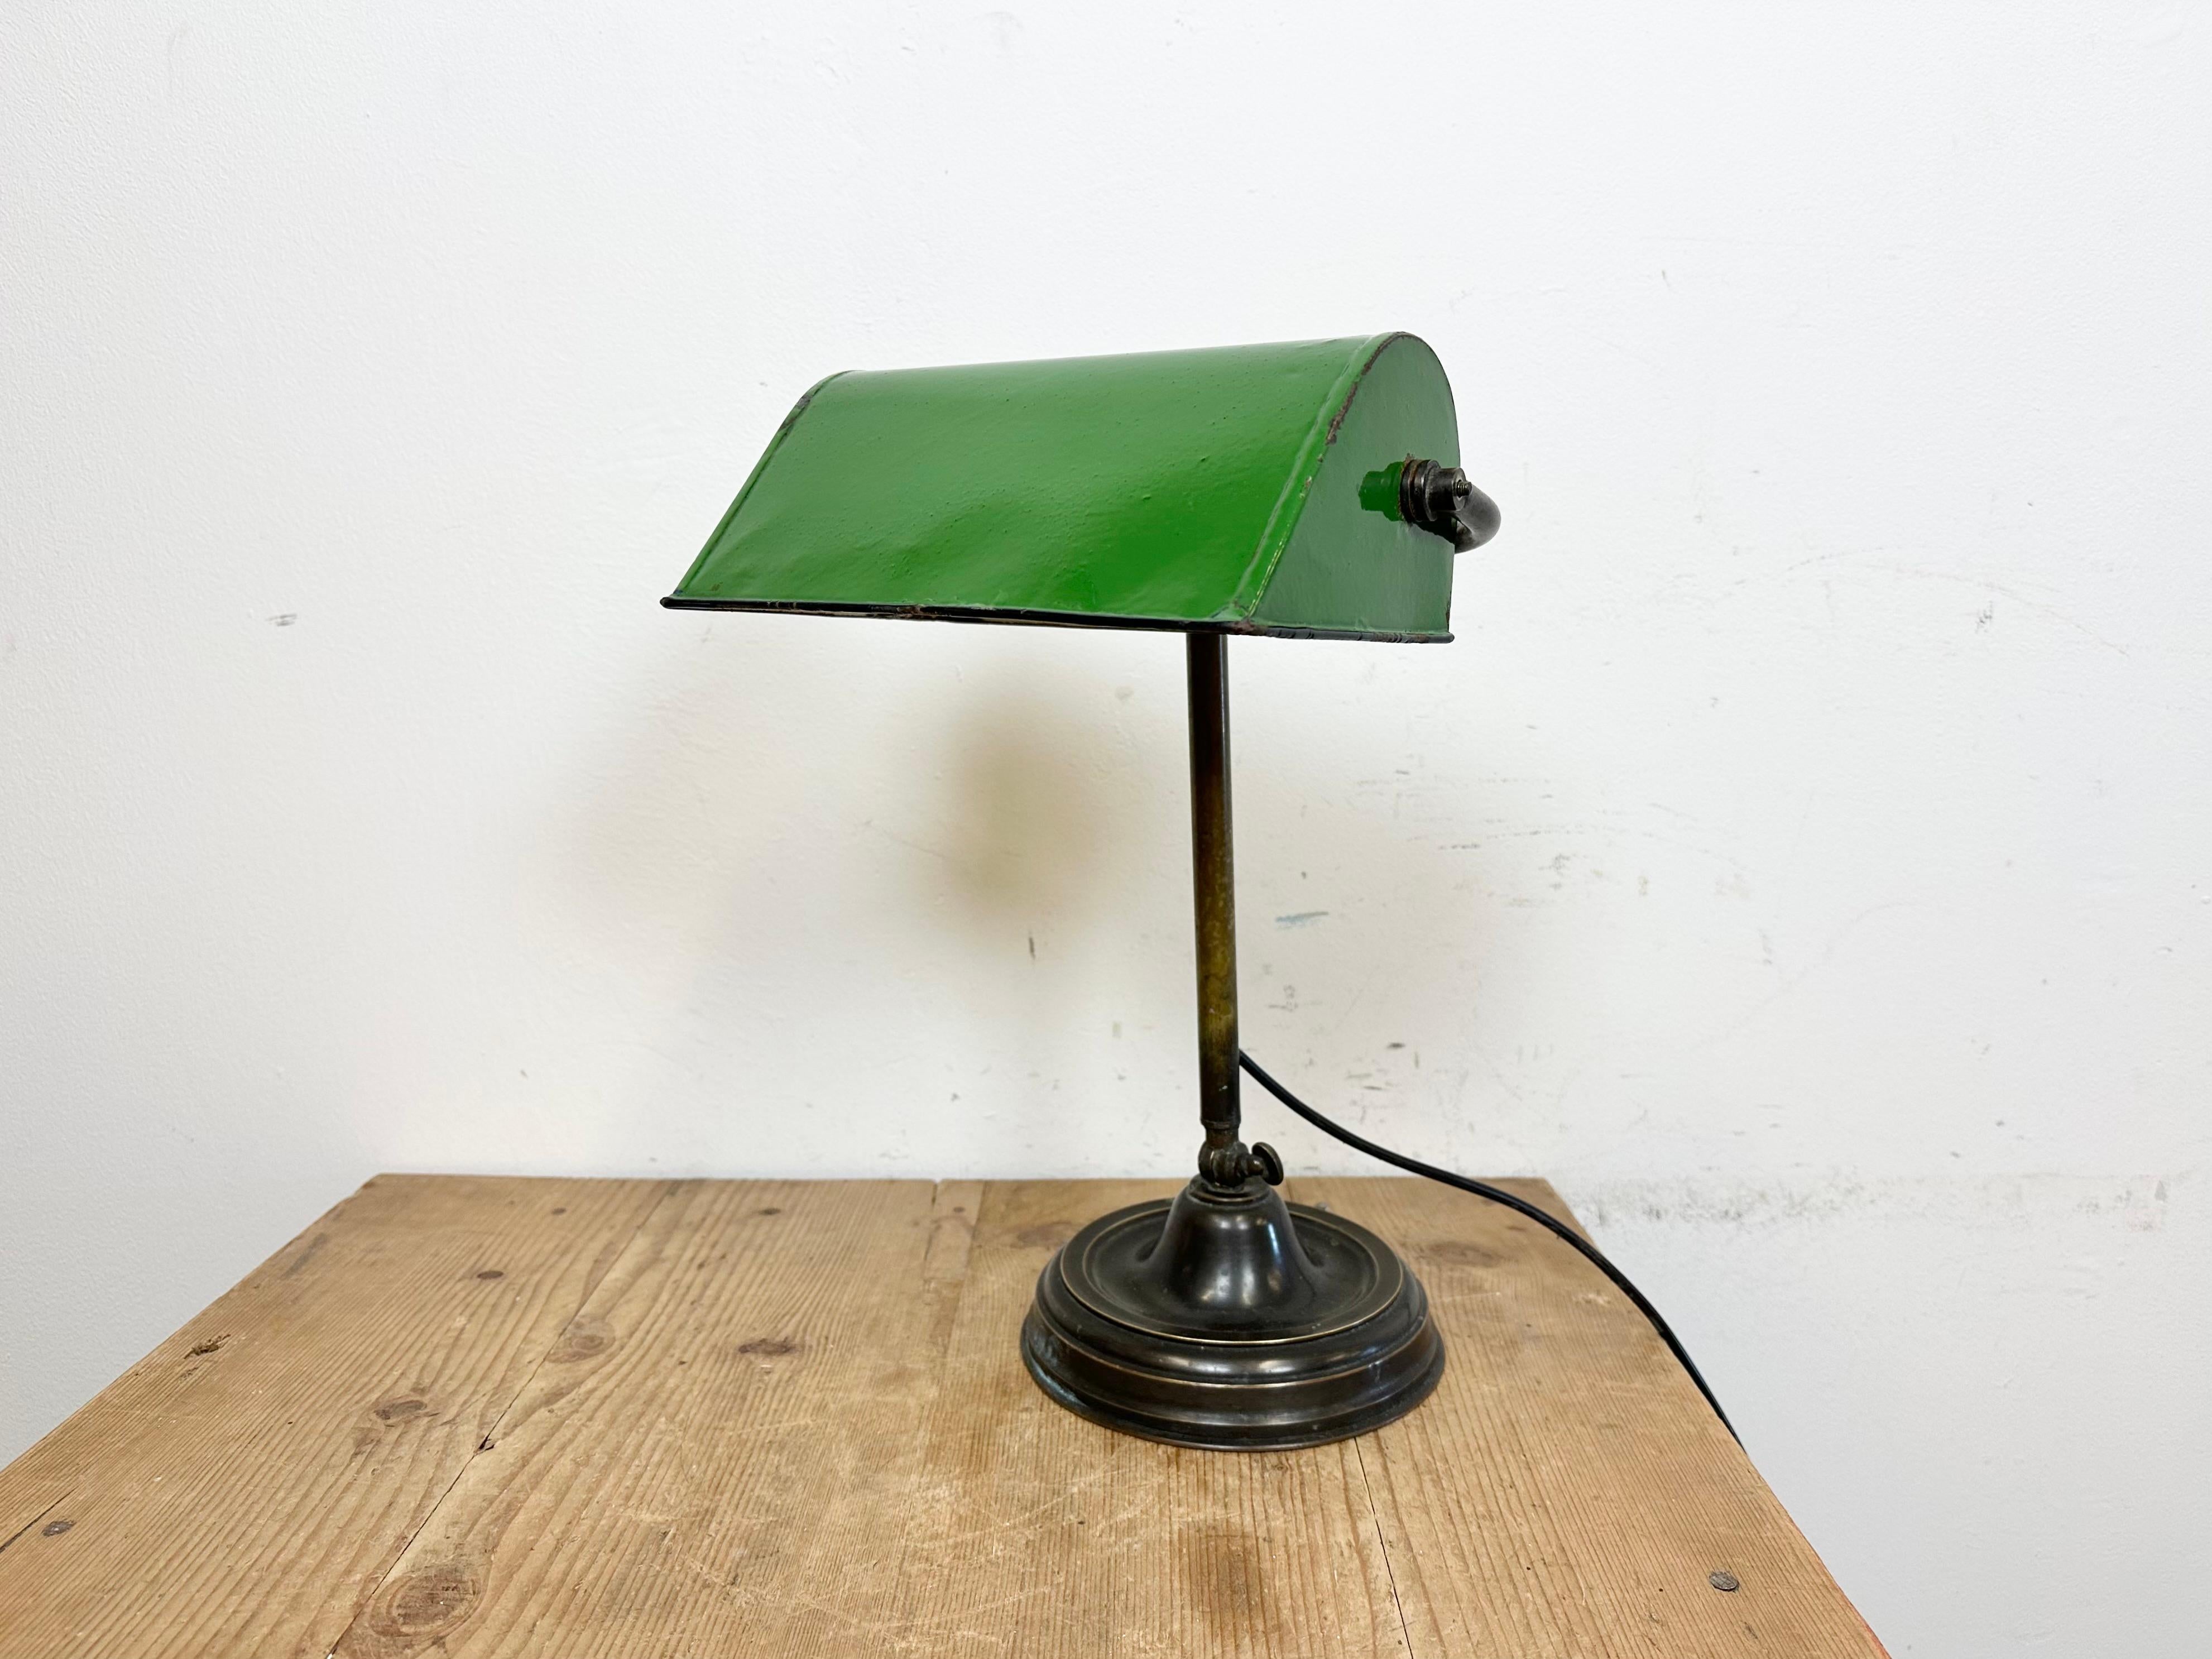 This table lamp was made in former Czechoslovakia during the 1960s. It features a green adjustable enamel shade with a white enamel interior and a brass iron base and arm with adjustable joint. The porcelain socket requires standard E 27/ E 26 ligh